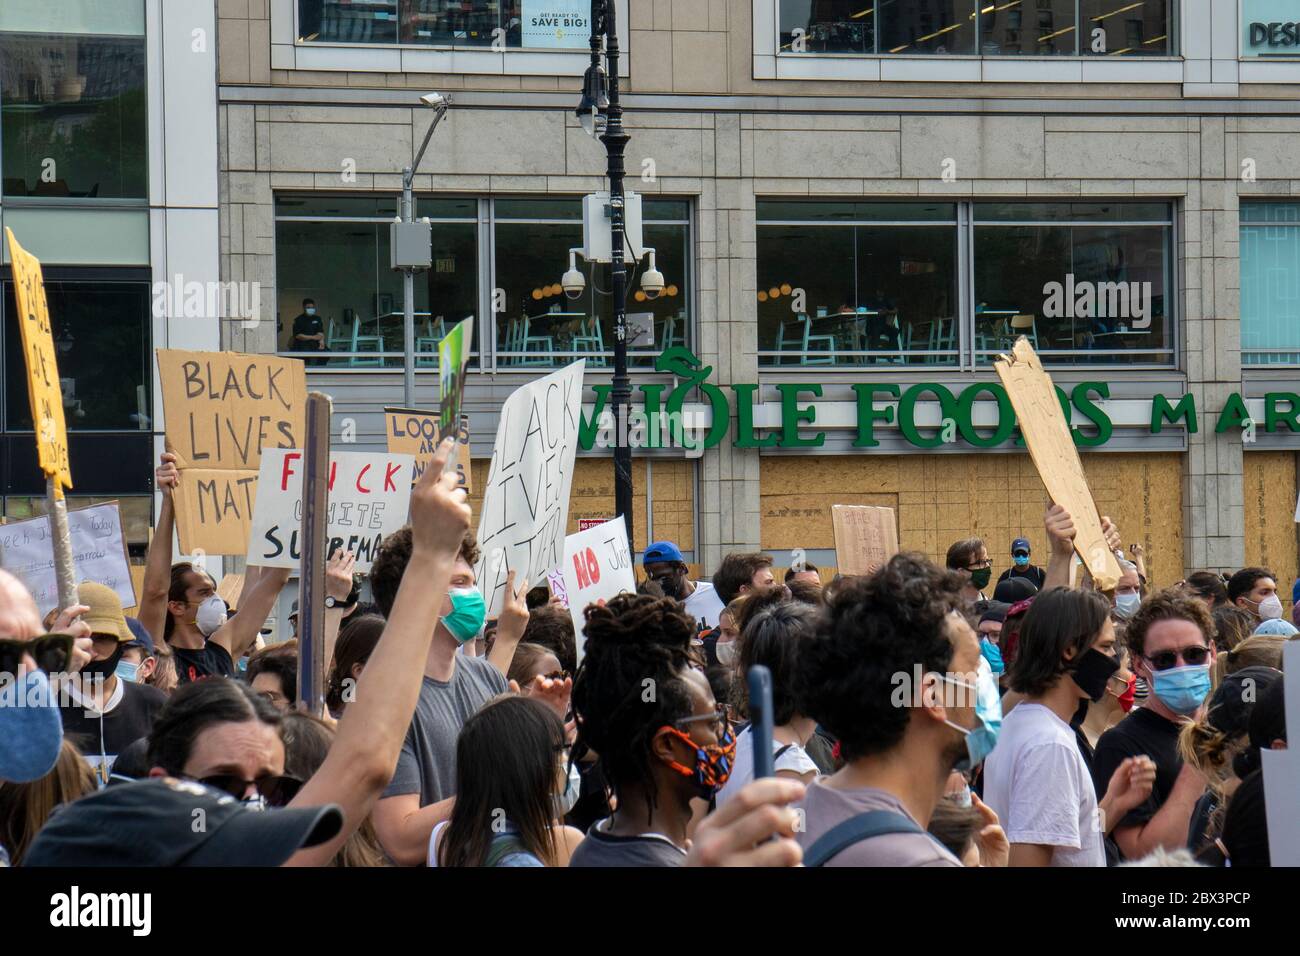 Black Lives Matter protesters in front of a boarded up Whole Foods Market, Union Square, New York City, 4 June 2020 Stock Photo